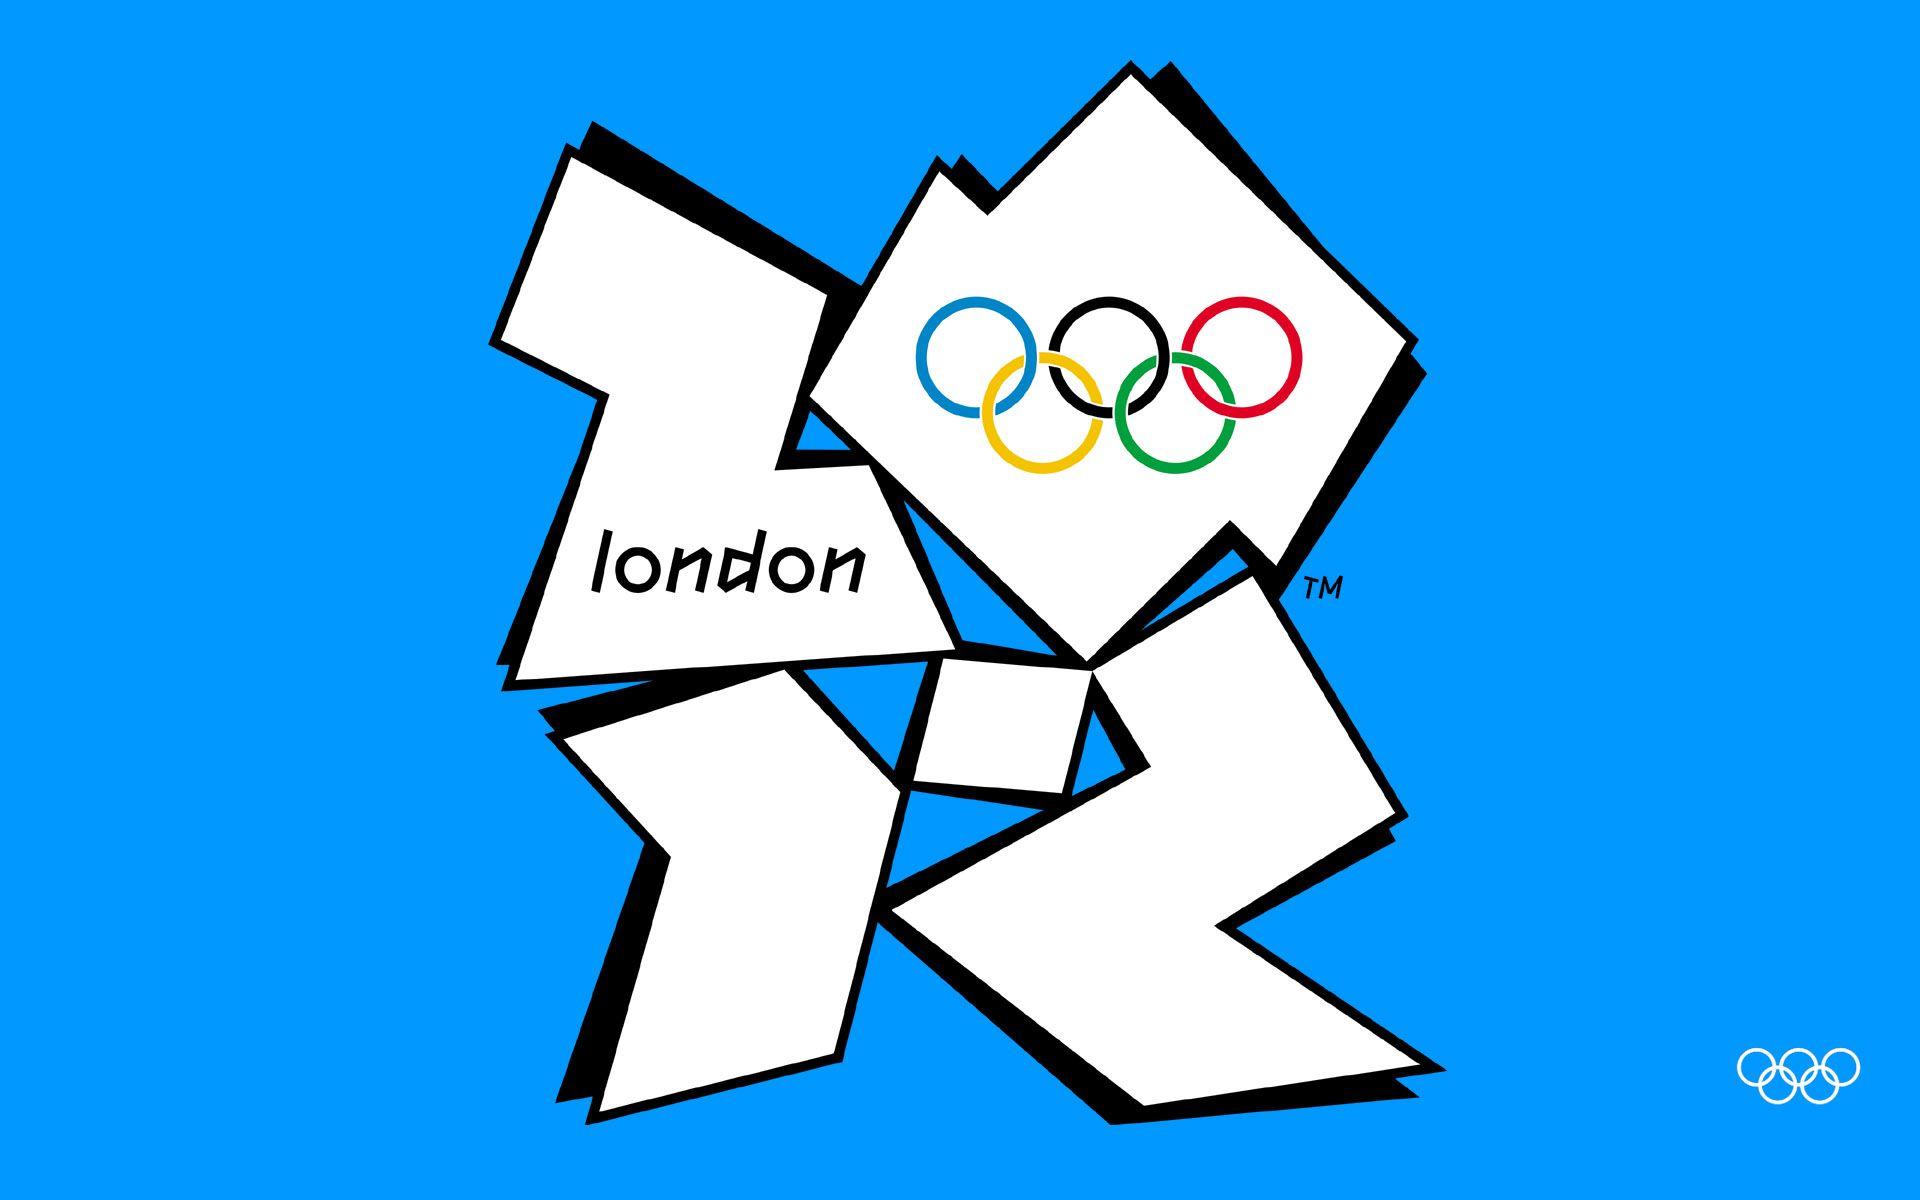 London 2012 Olympics Logo - London 2012 Olympic Logo: Was It Really So Bad After All?